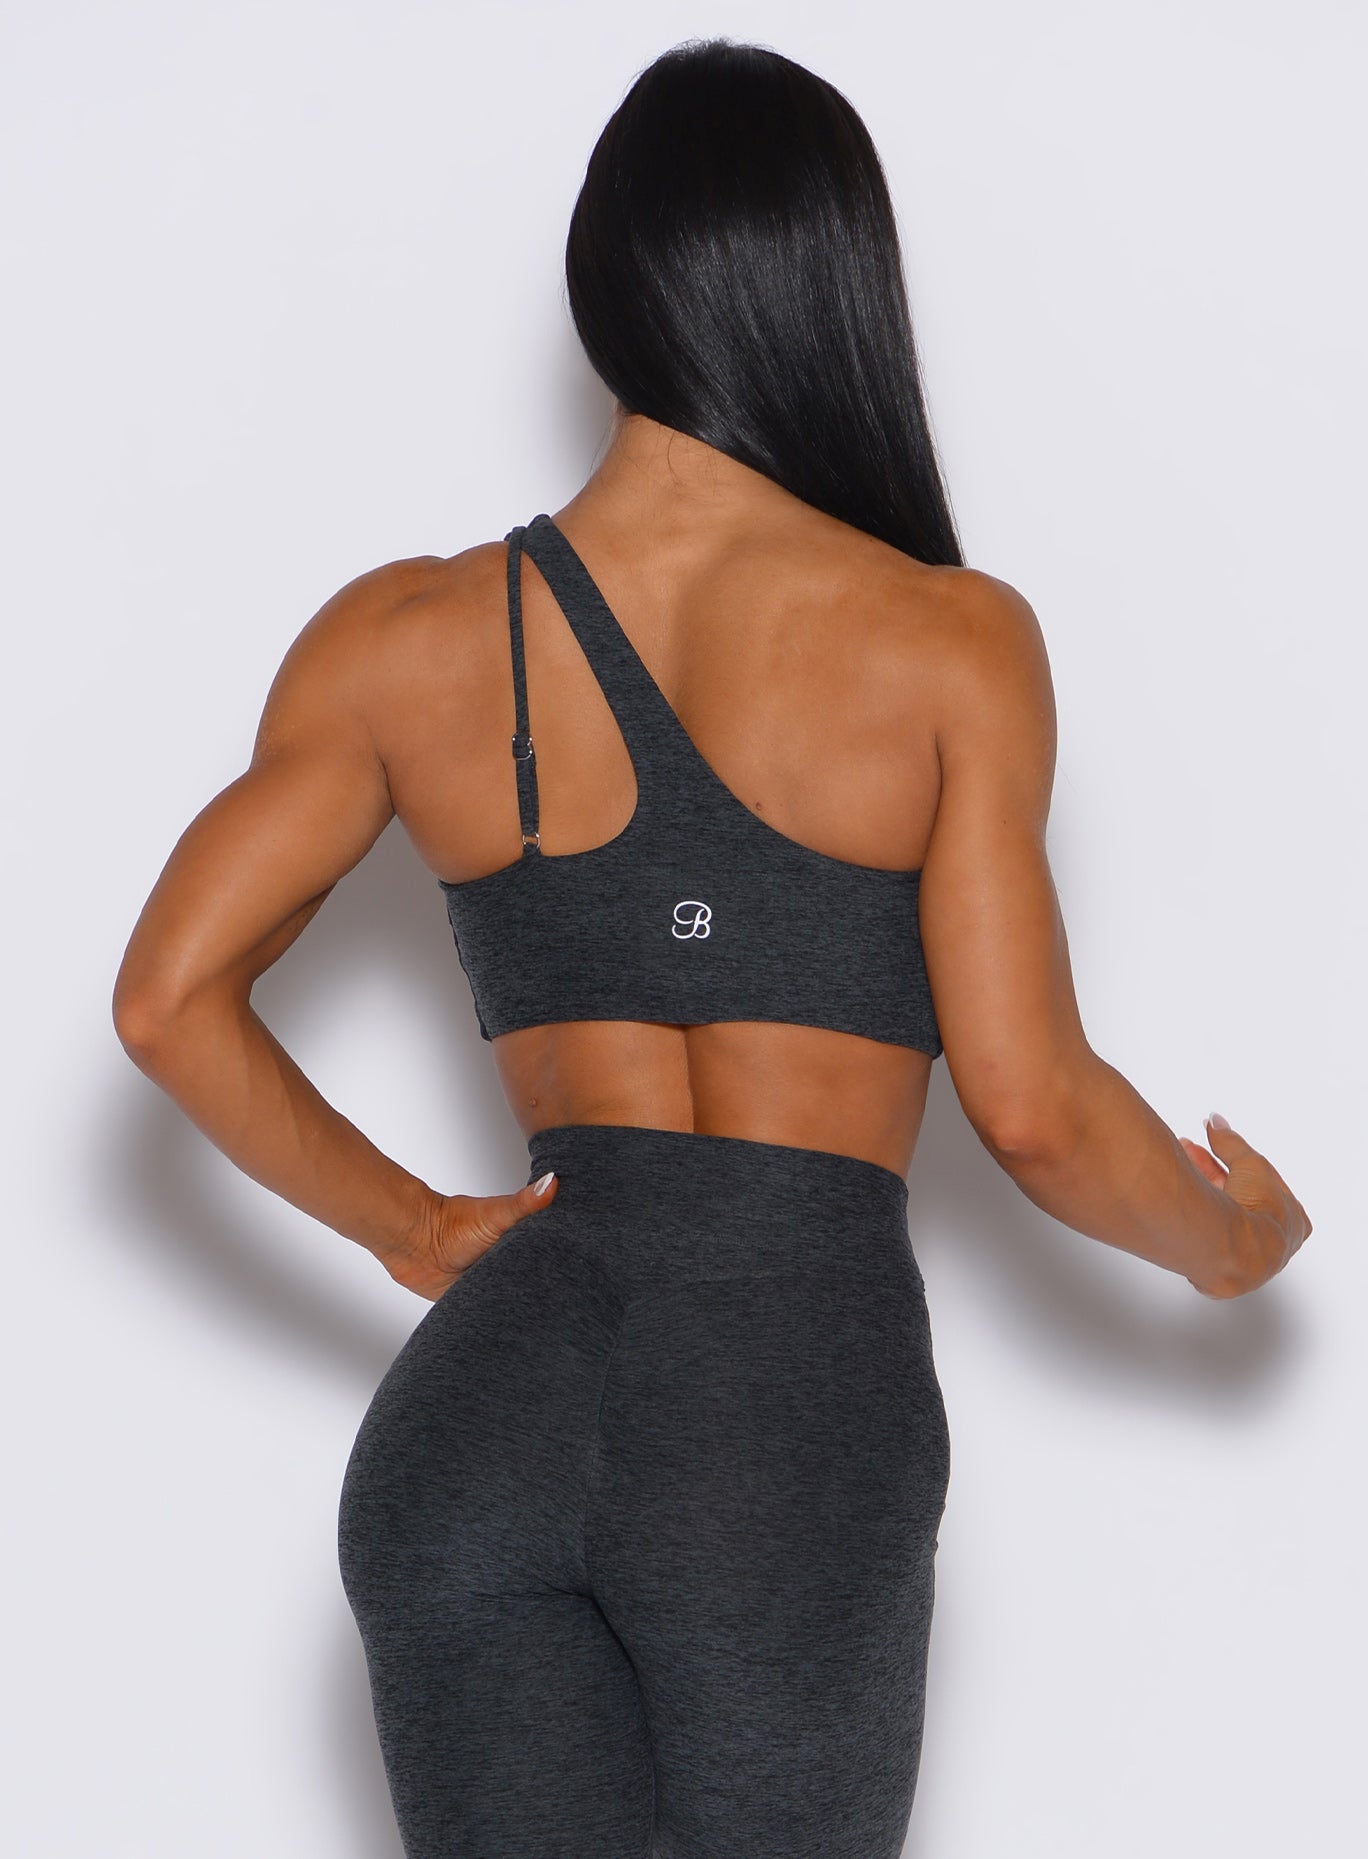 back profile view of a model wearing our lateral top in charcoal color along with a matching leggings